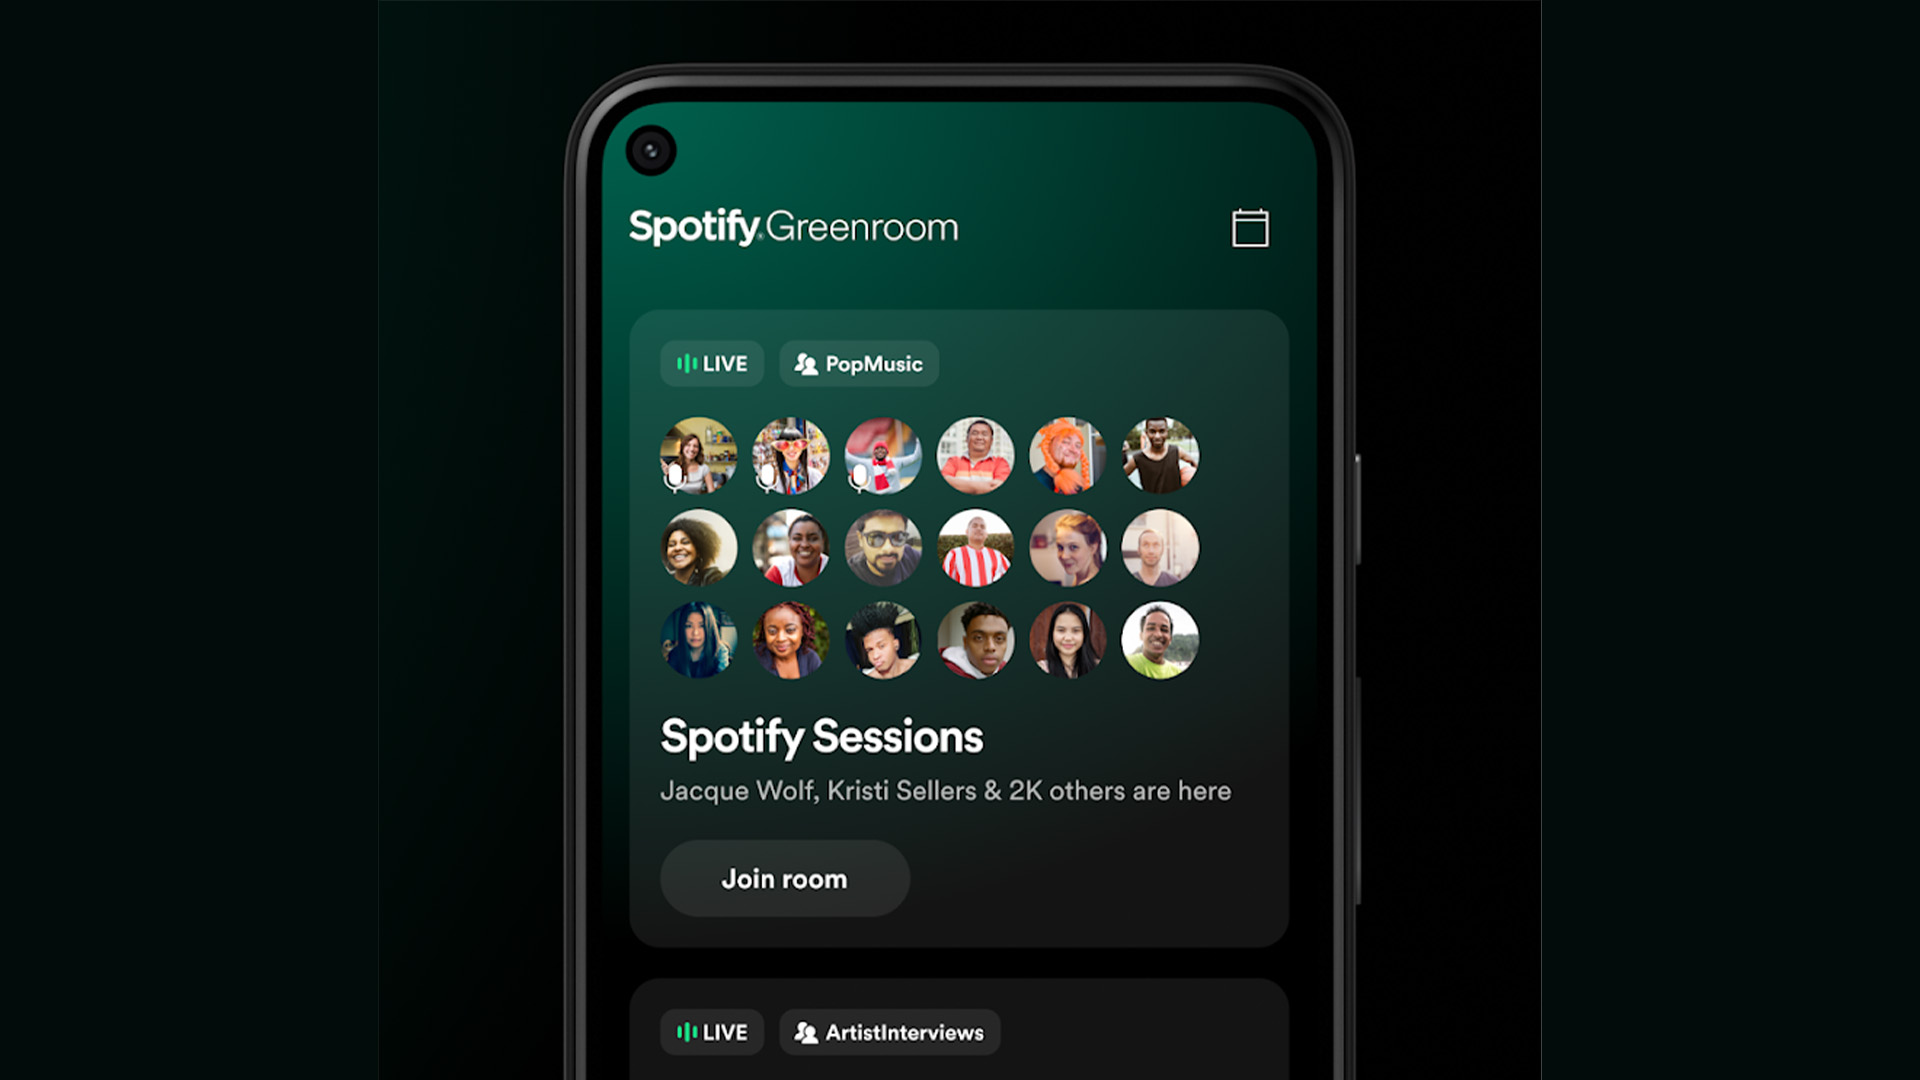 Android Apps Weekly Spotify Greenroom screenshot